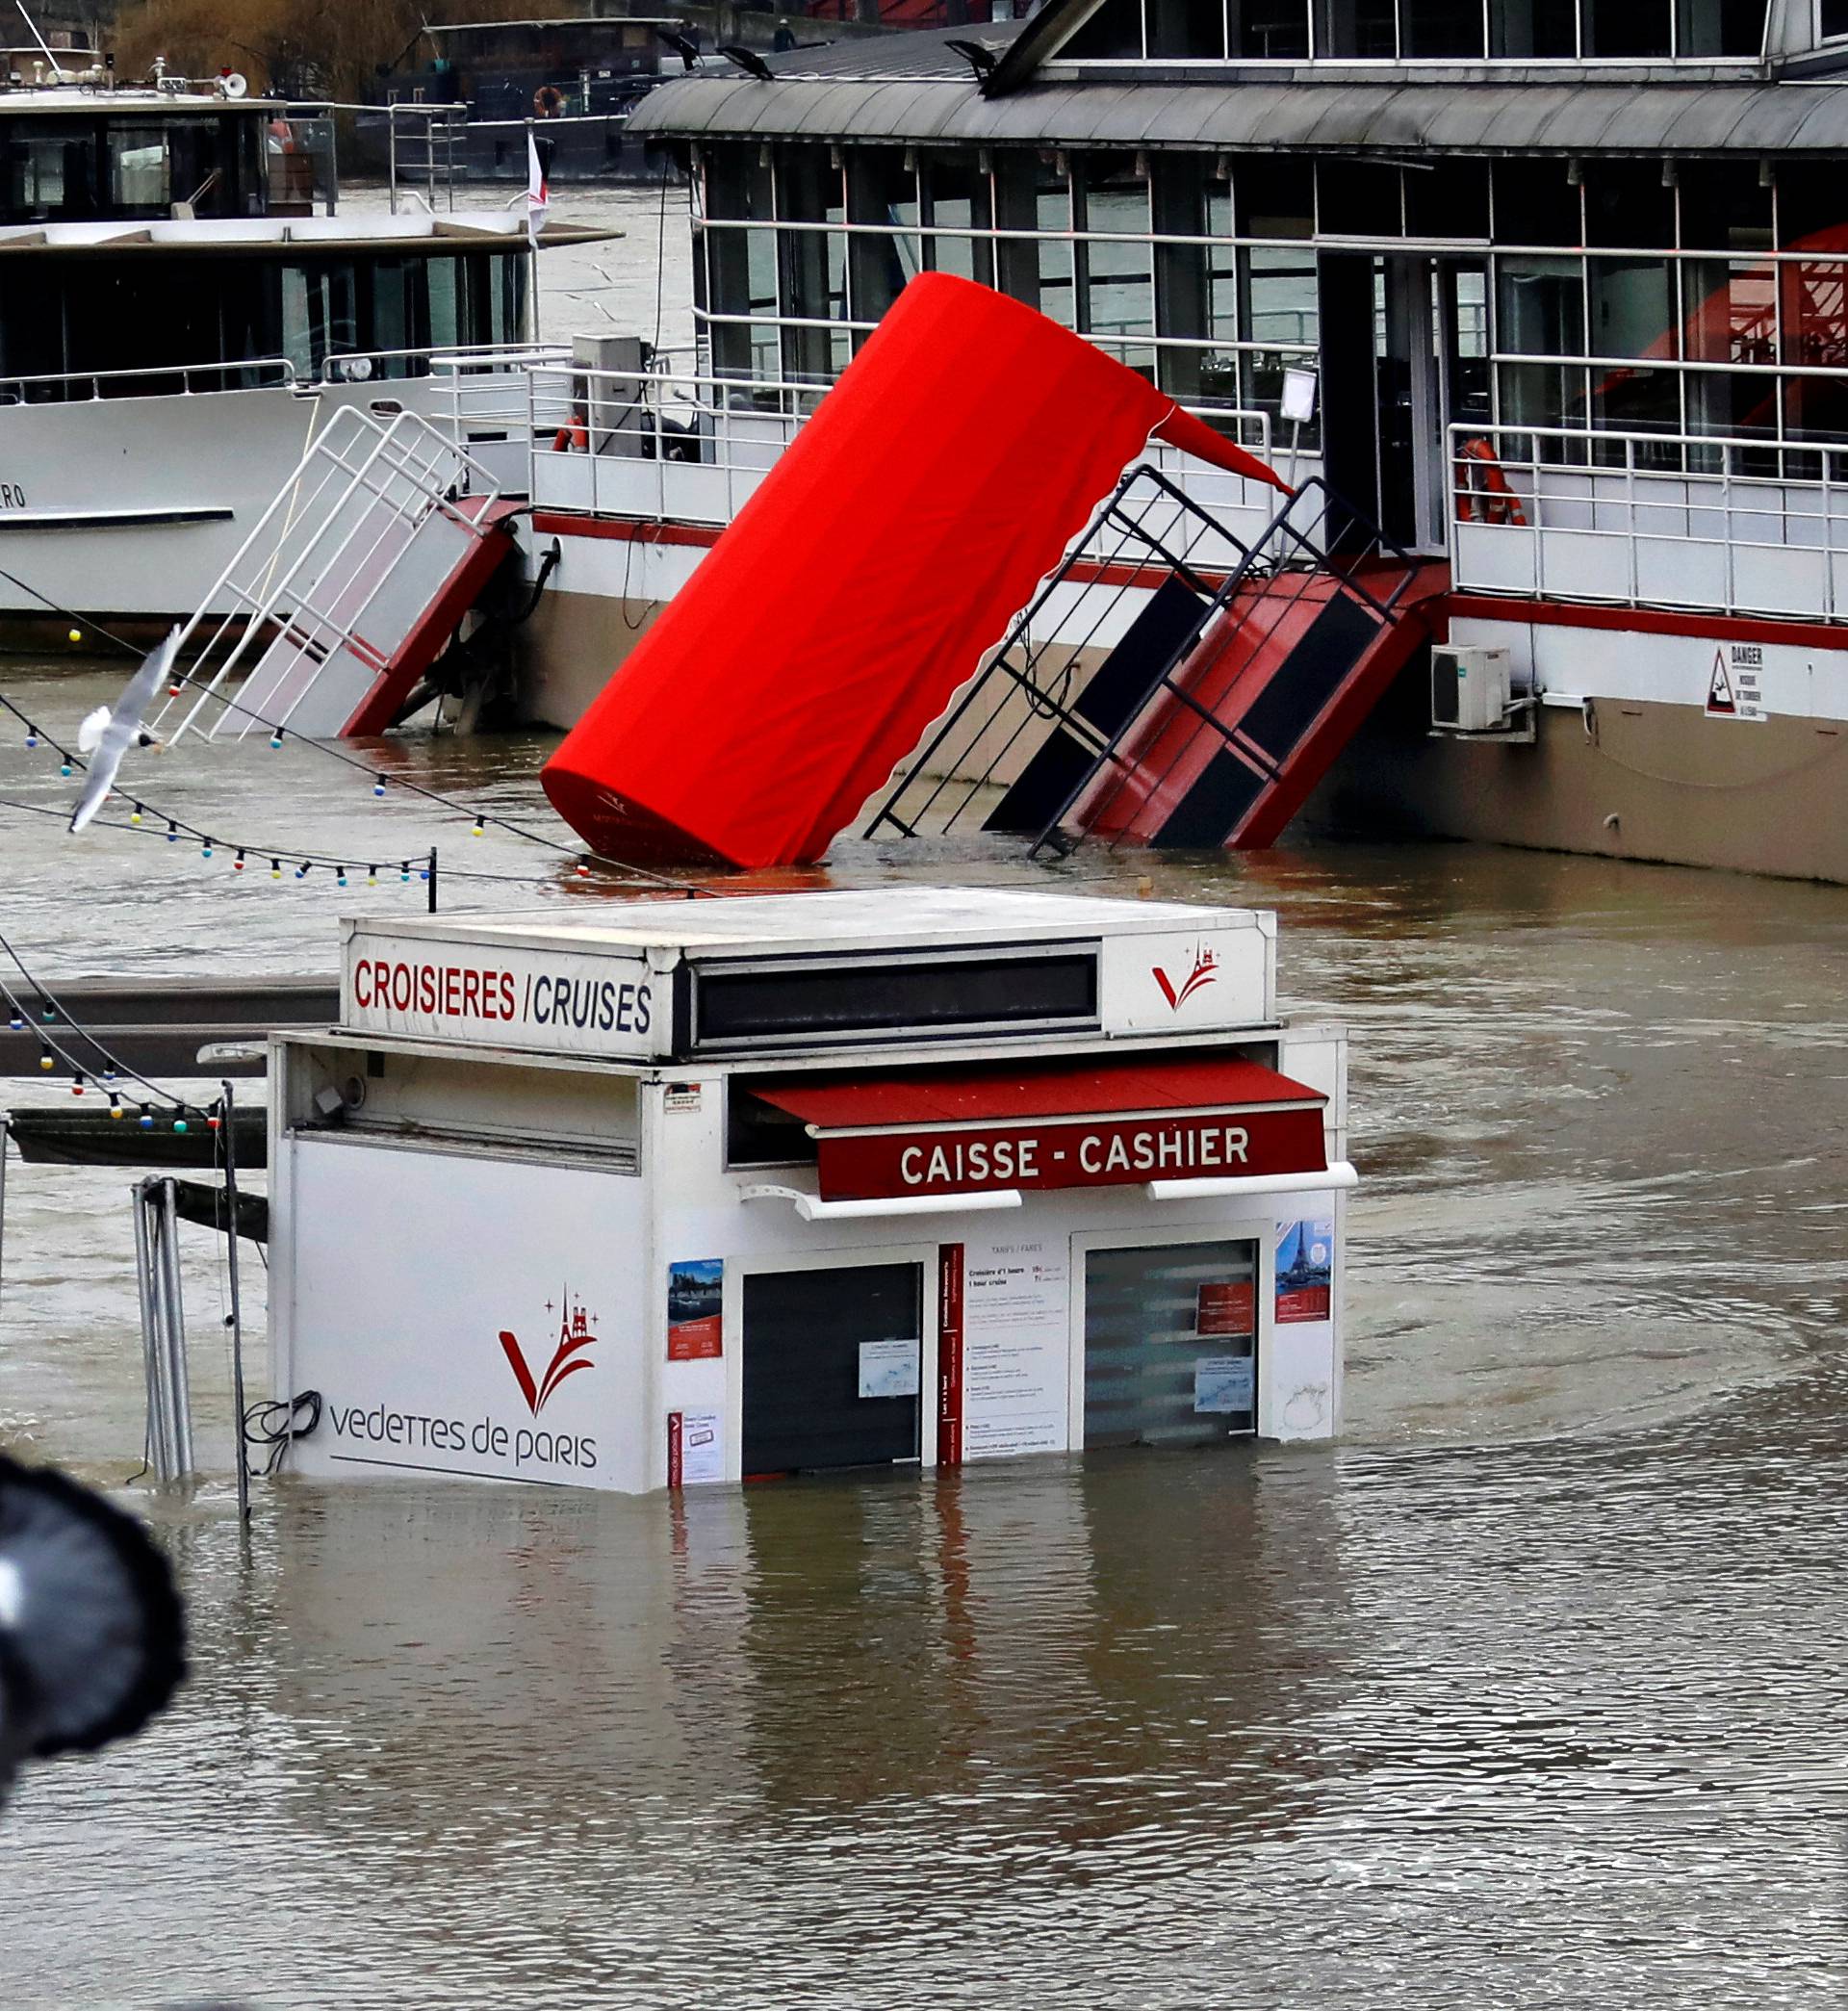 A ticket booth for sightseeing boats is partly submerged by the River Seine in Paris